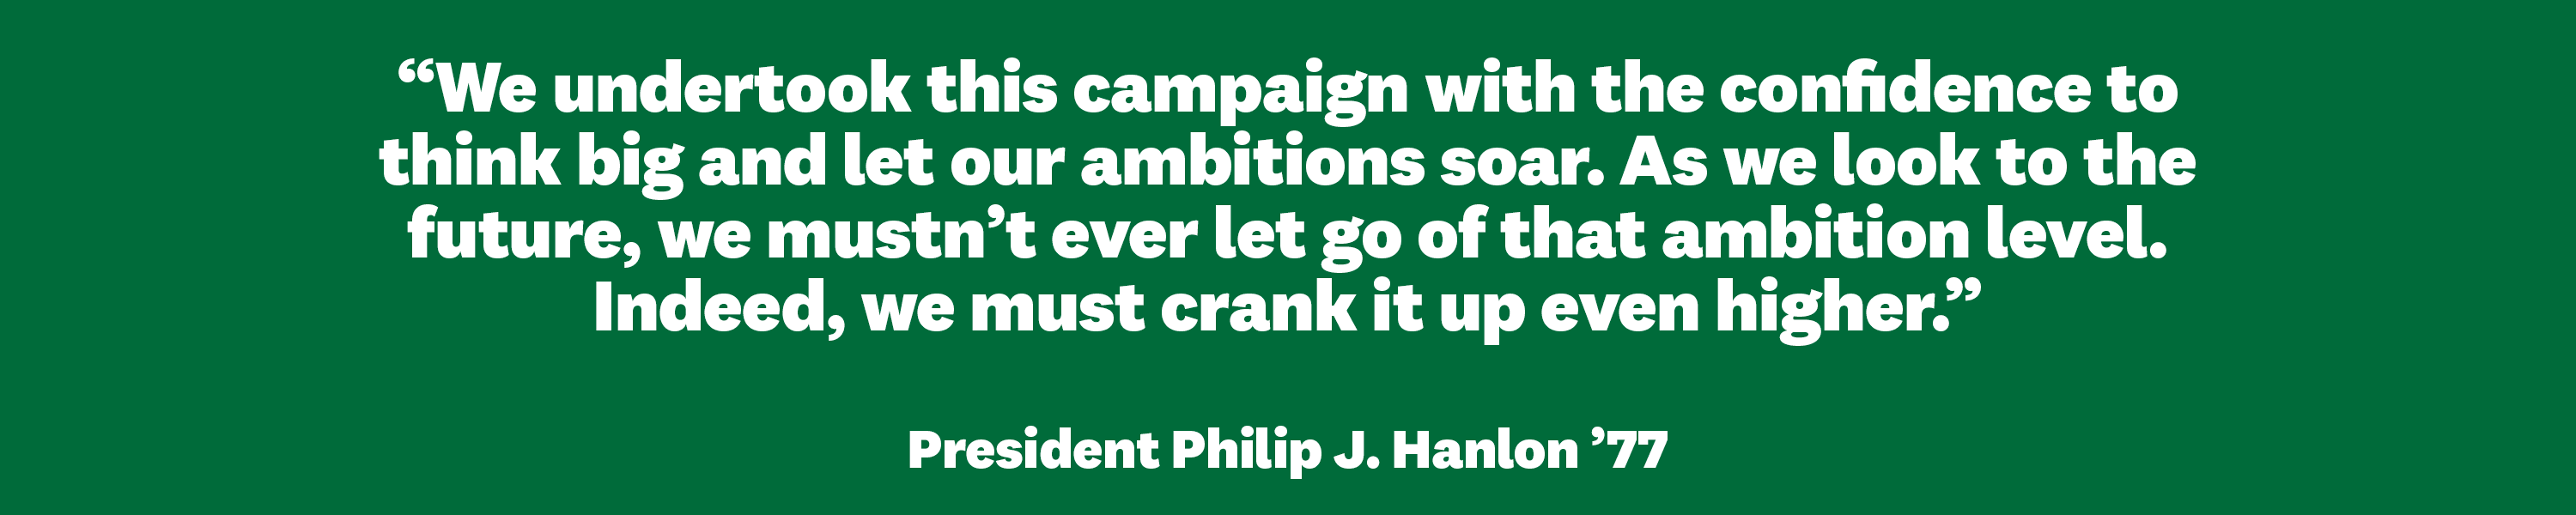 “We undertook this campaign with the confidence to think big and let our ambitions soar. As we look to the future, we mustn’t ever let go of that ambition level. Indeed, we must crank it up even higher." President Philip J. Hanlon ’77